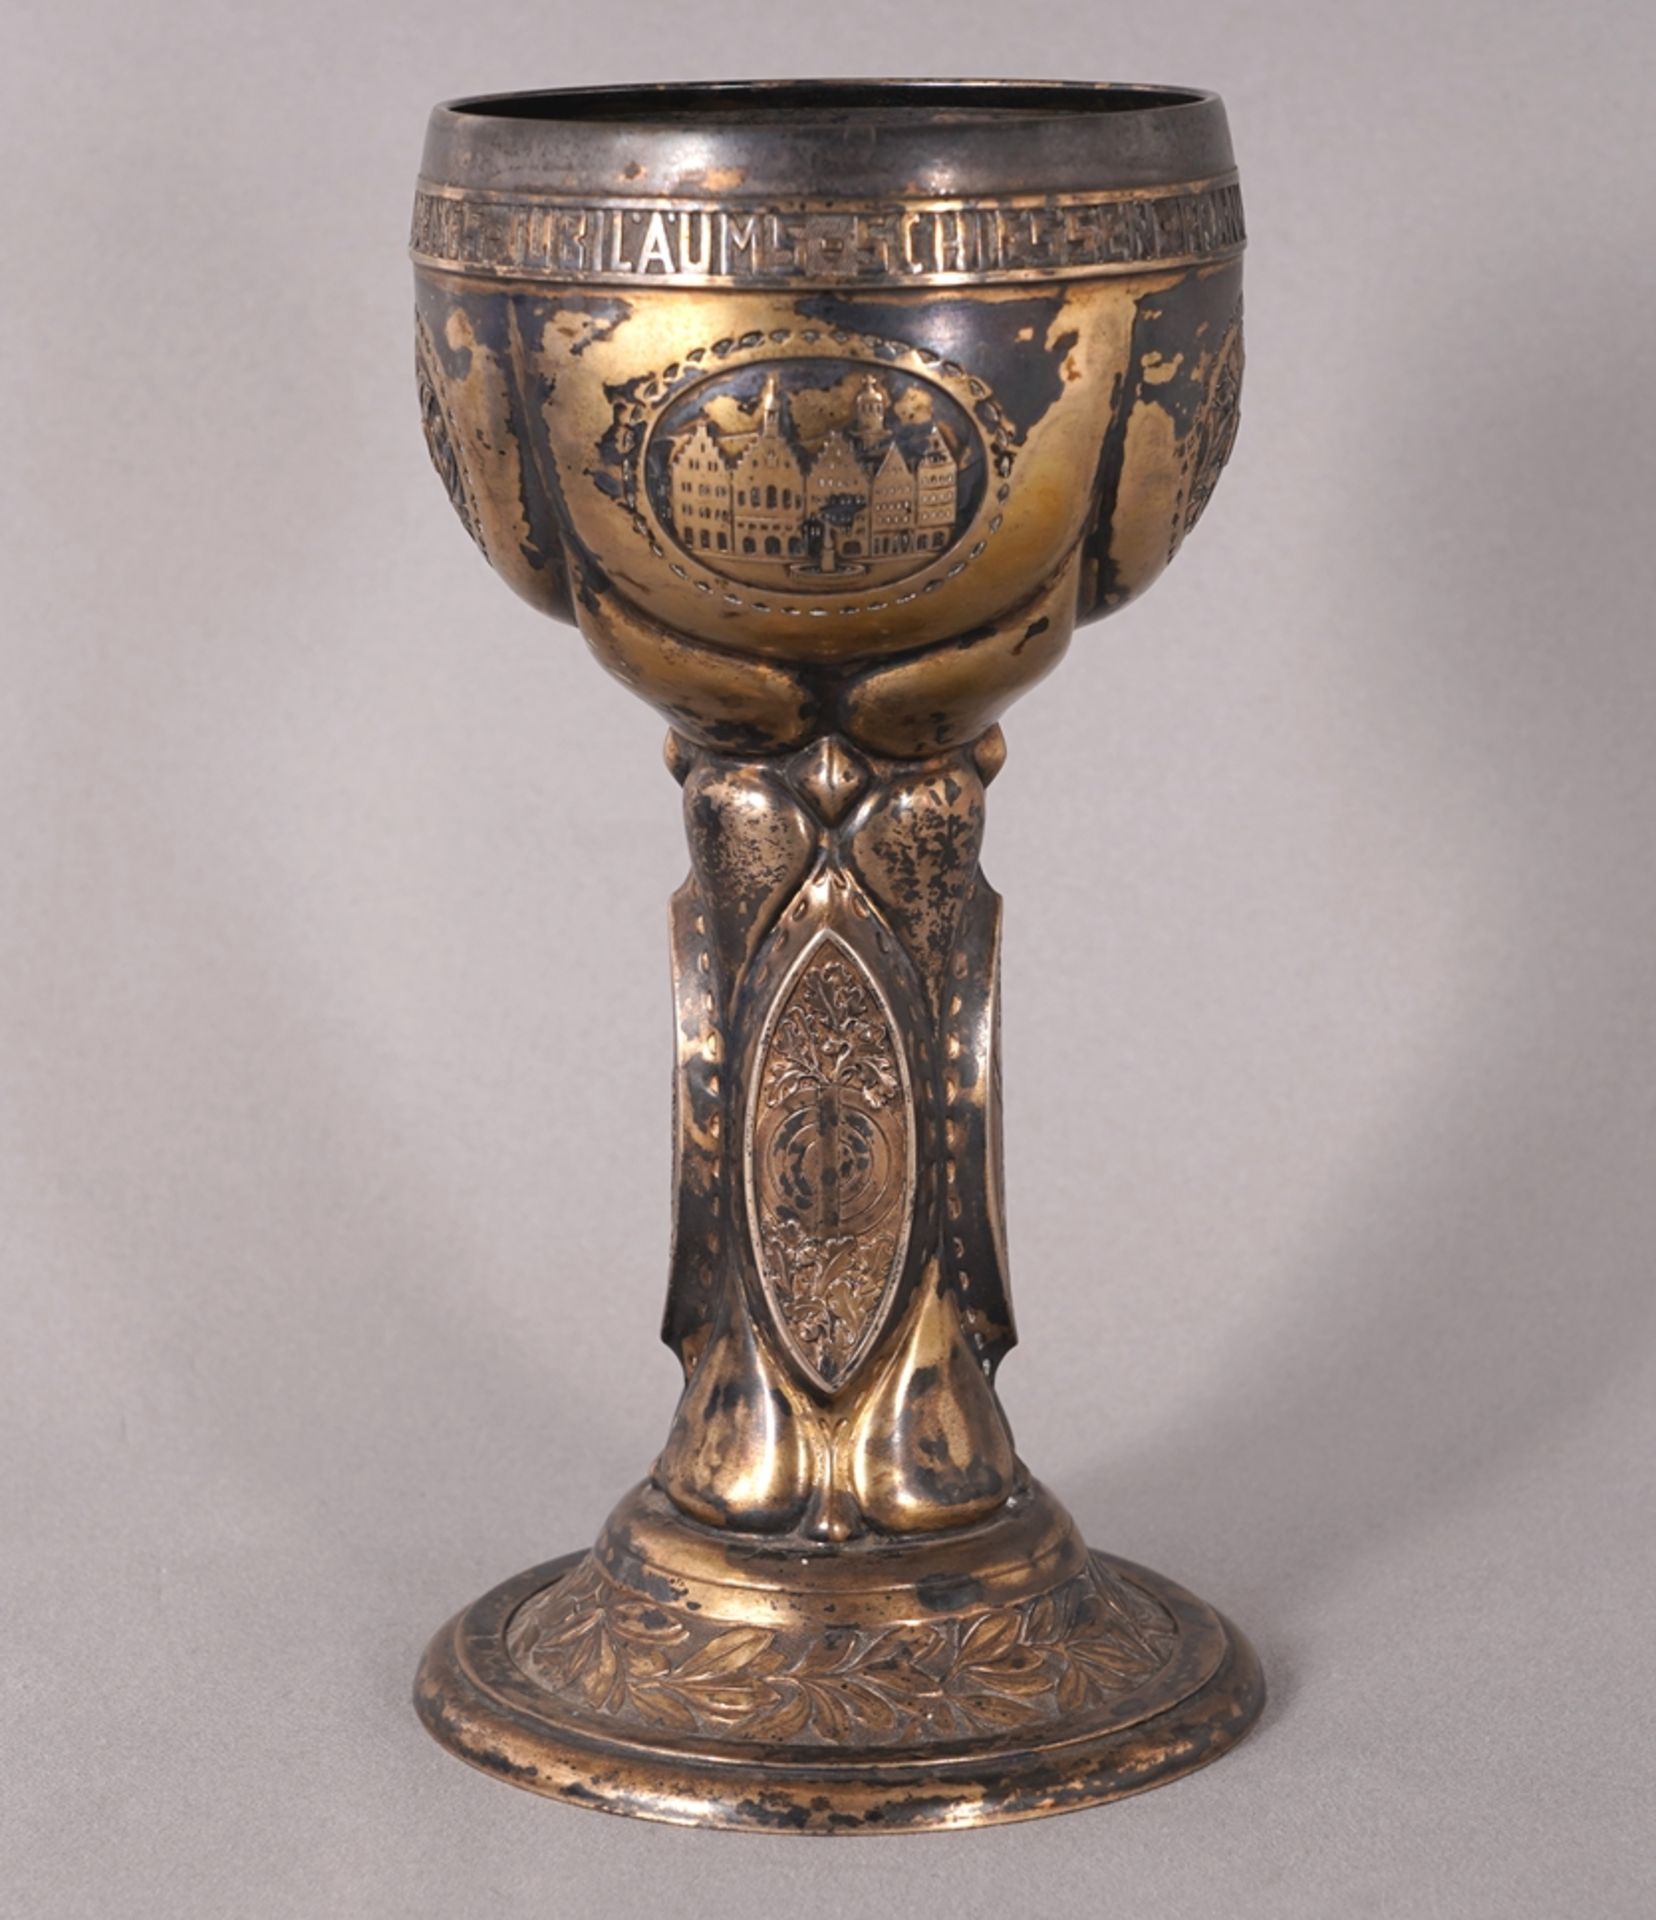 Rifleman's Cup - Image 4 of 7